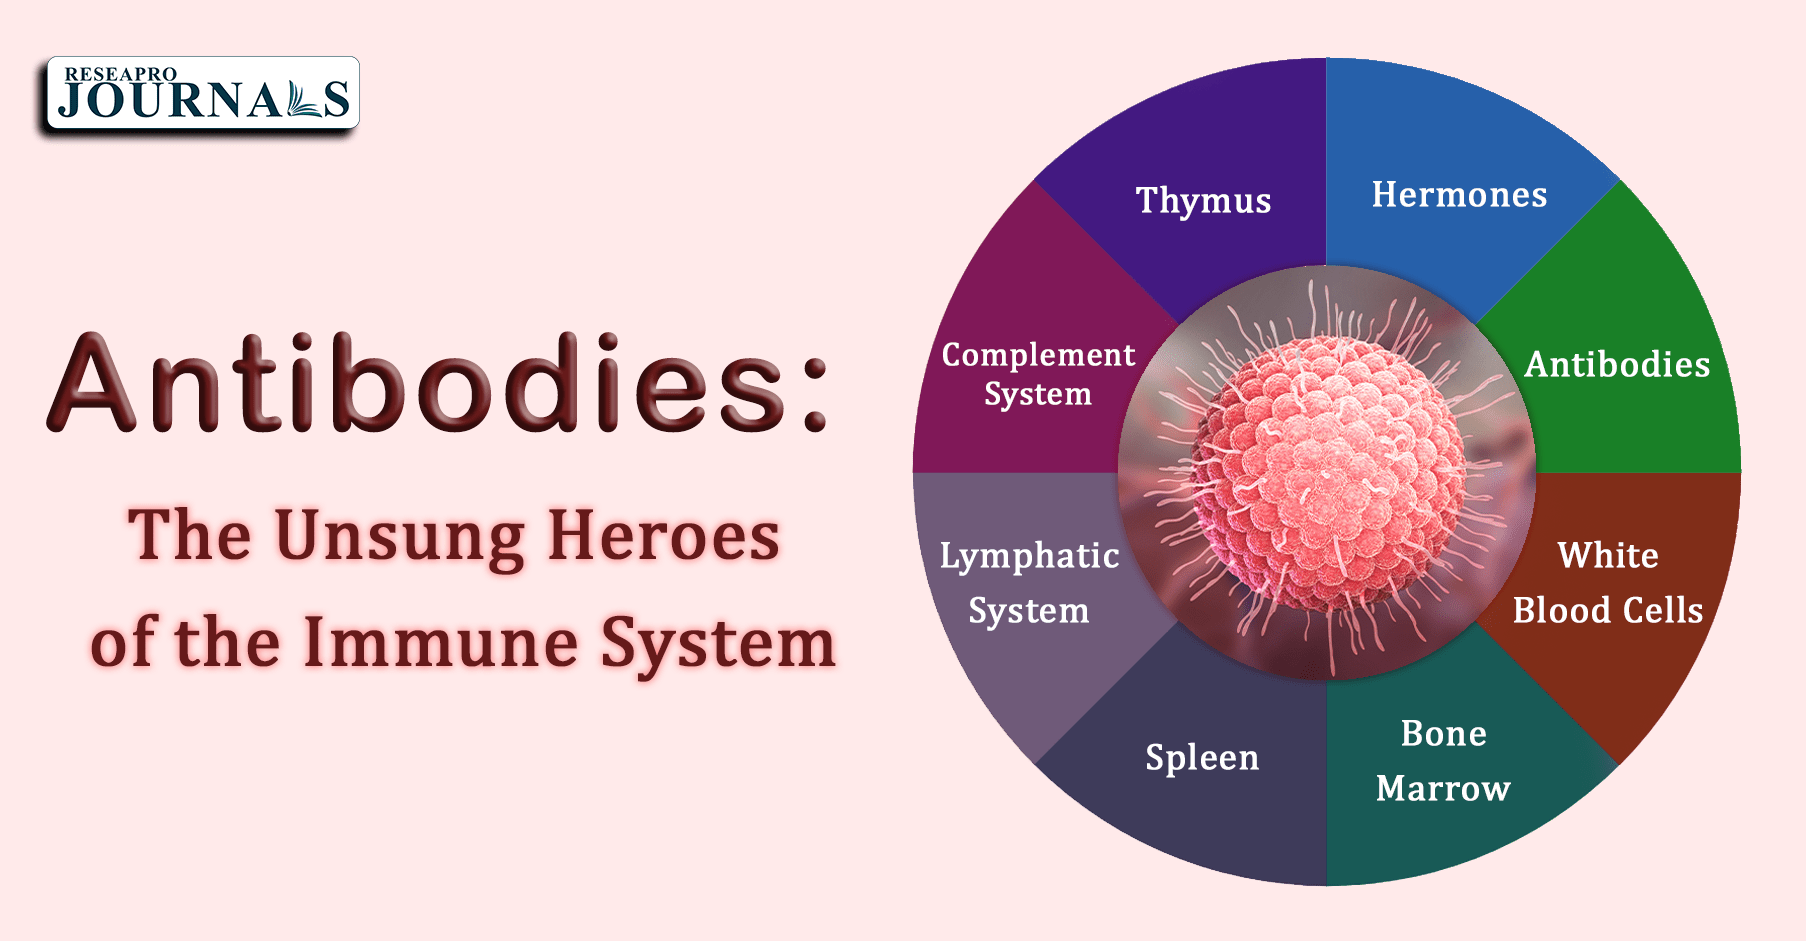 Antibodies: The Unsung Heroes of the Immune System